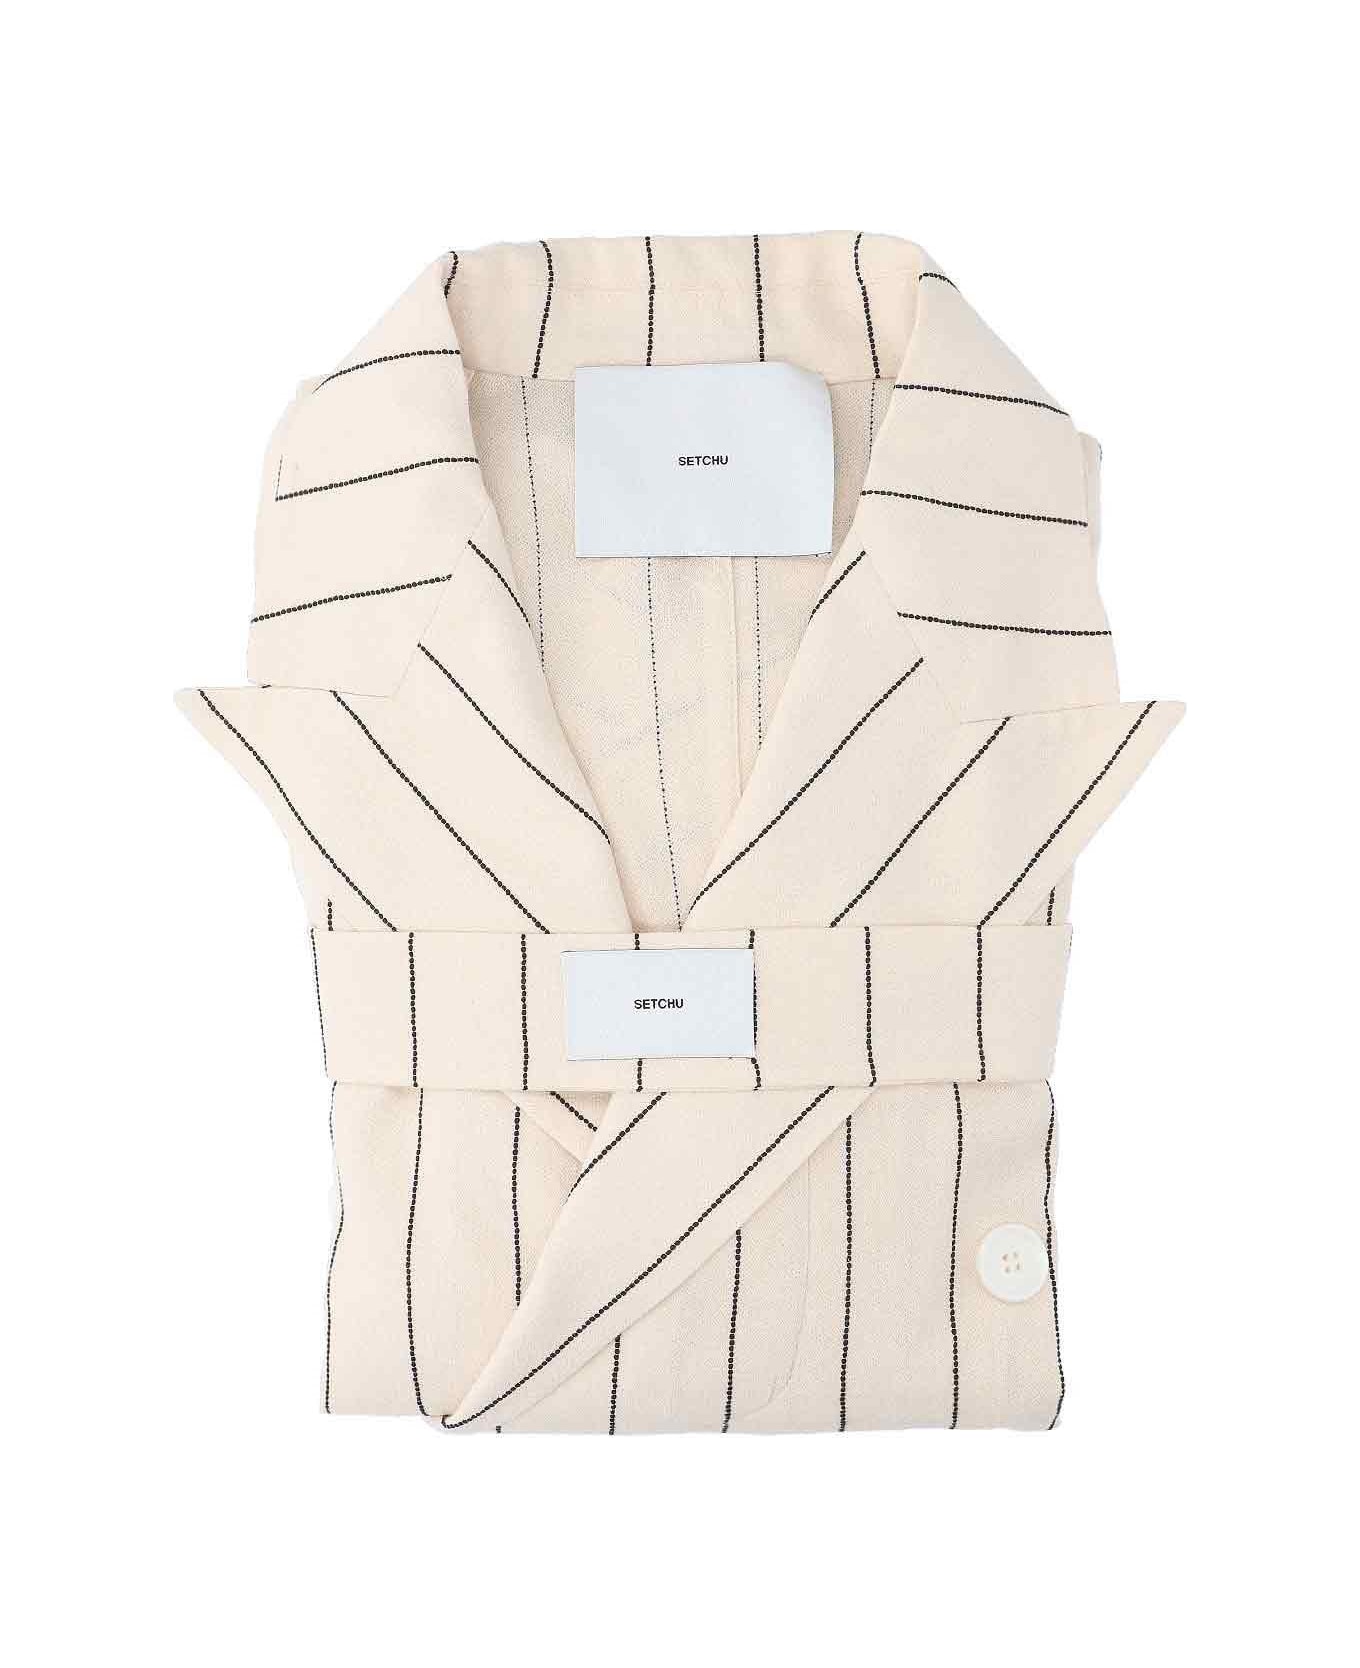 Setchu Pinstriped Double-breasted Blazer - Beige